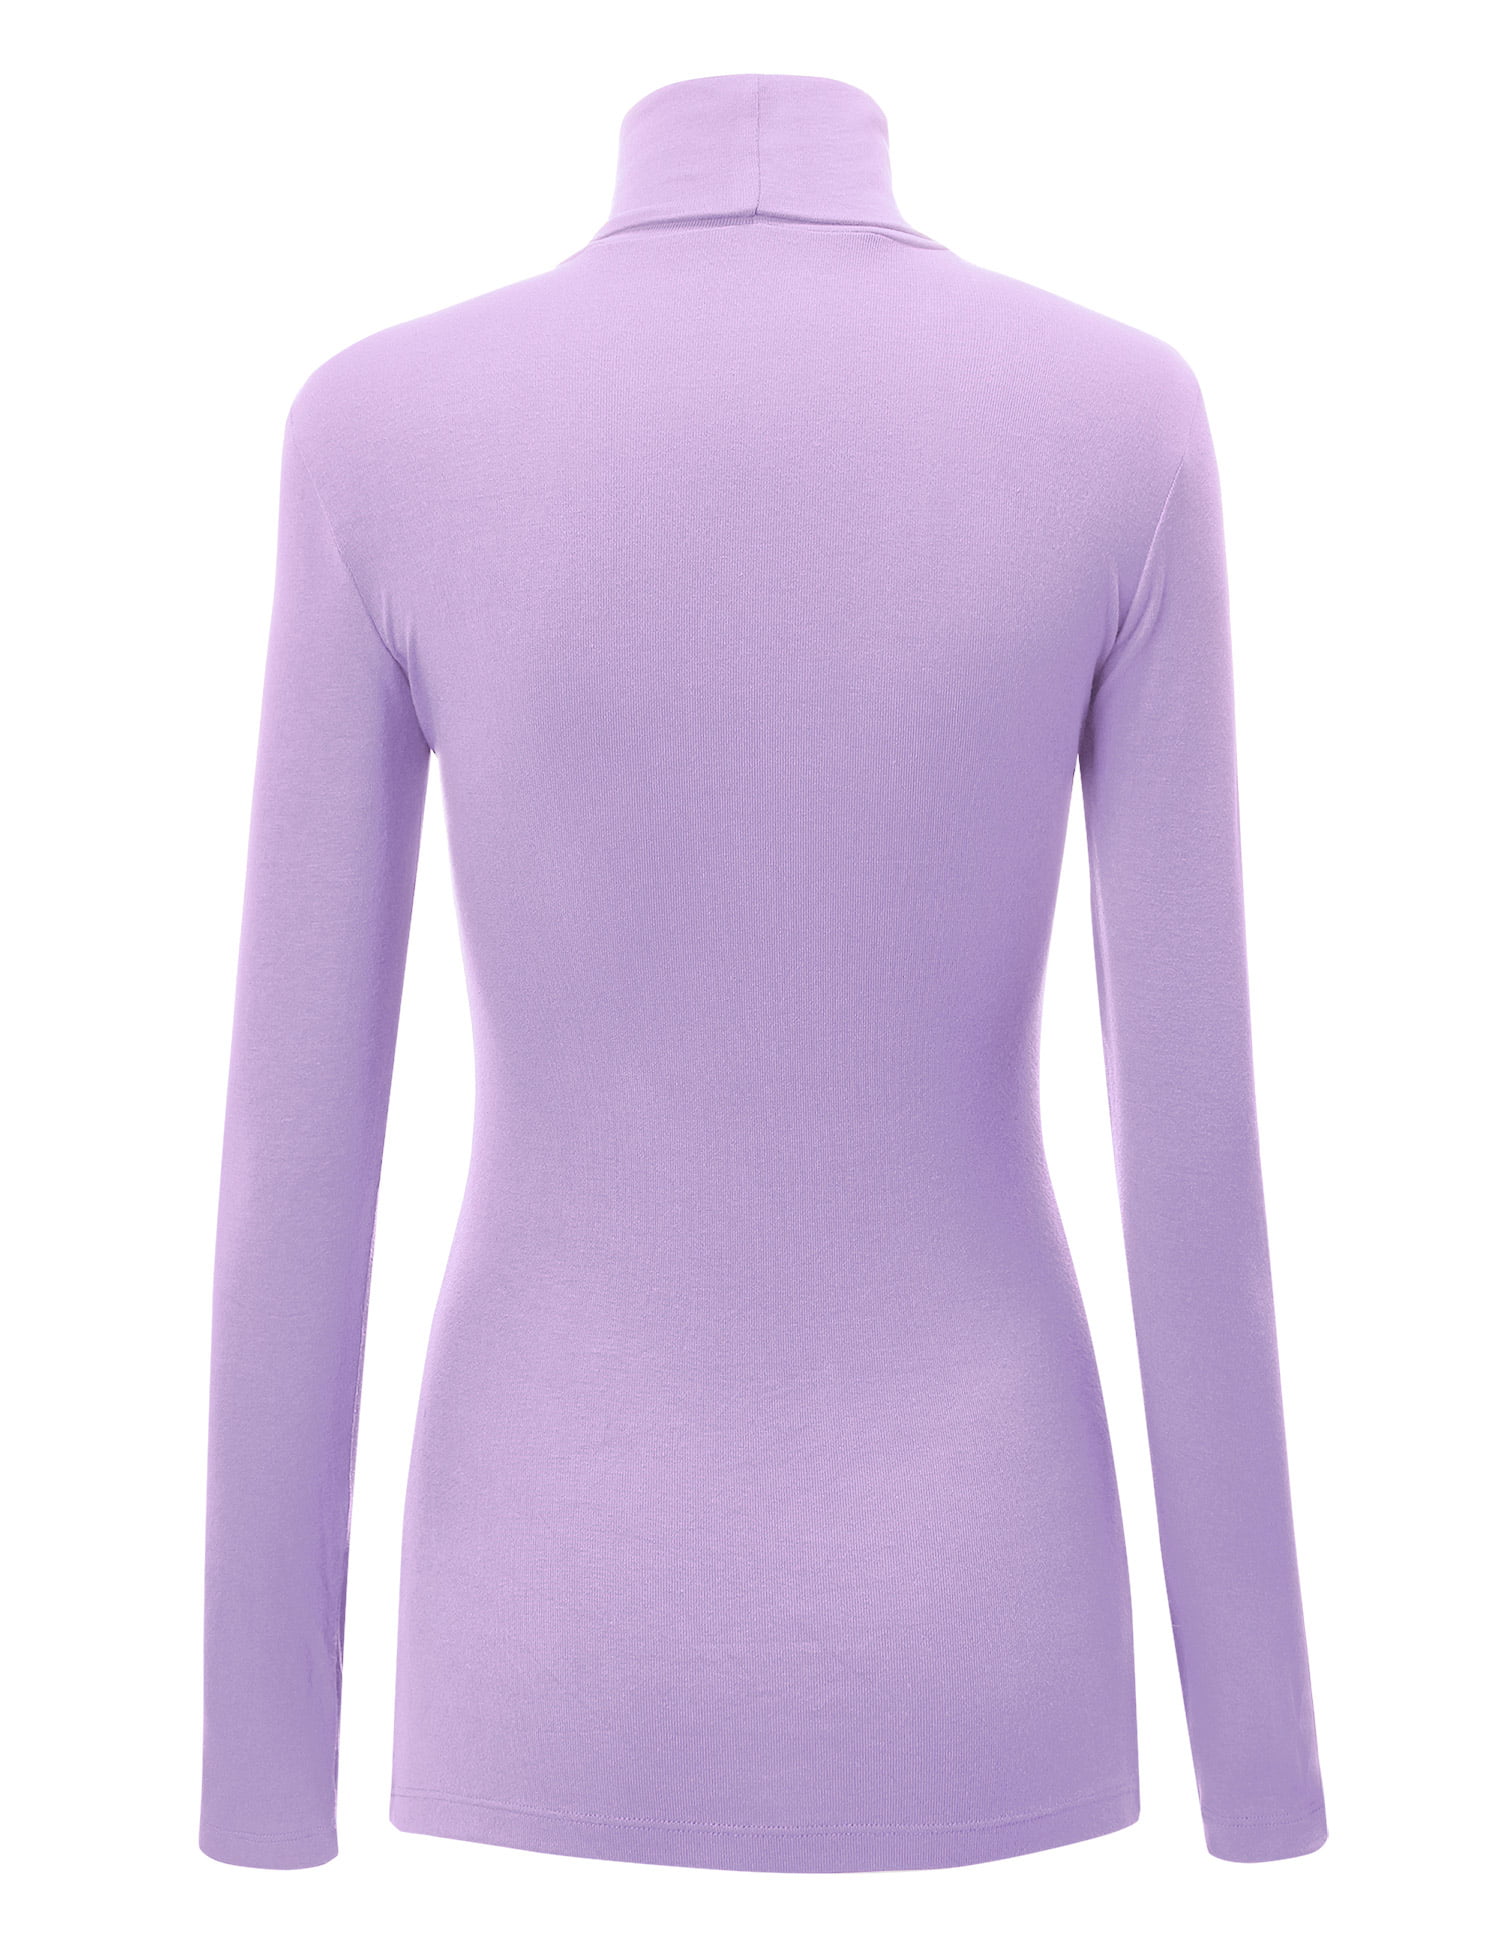 Made by Johnny Women's Long Sleeve Rib Turtleneck Top Pullover Sweater L  LILAC